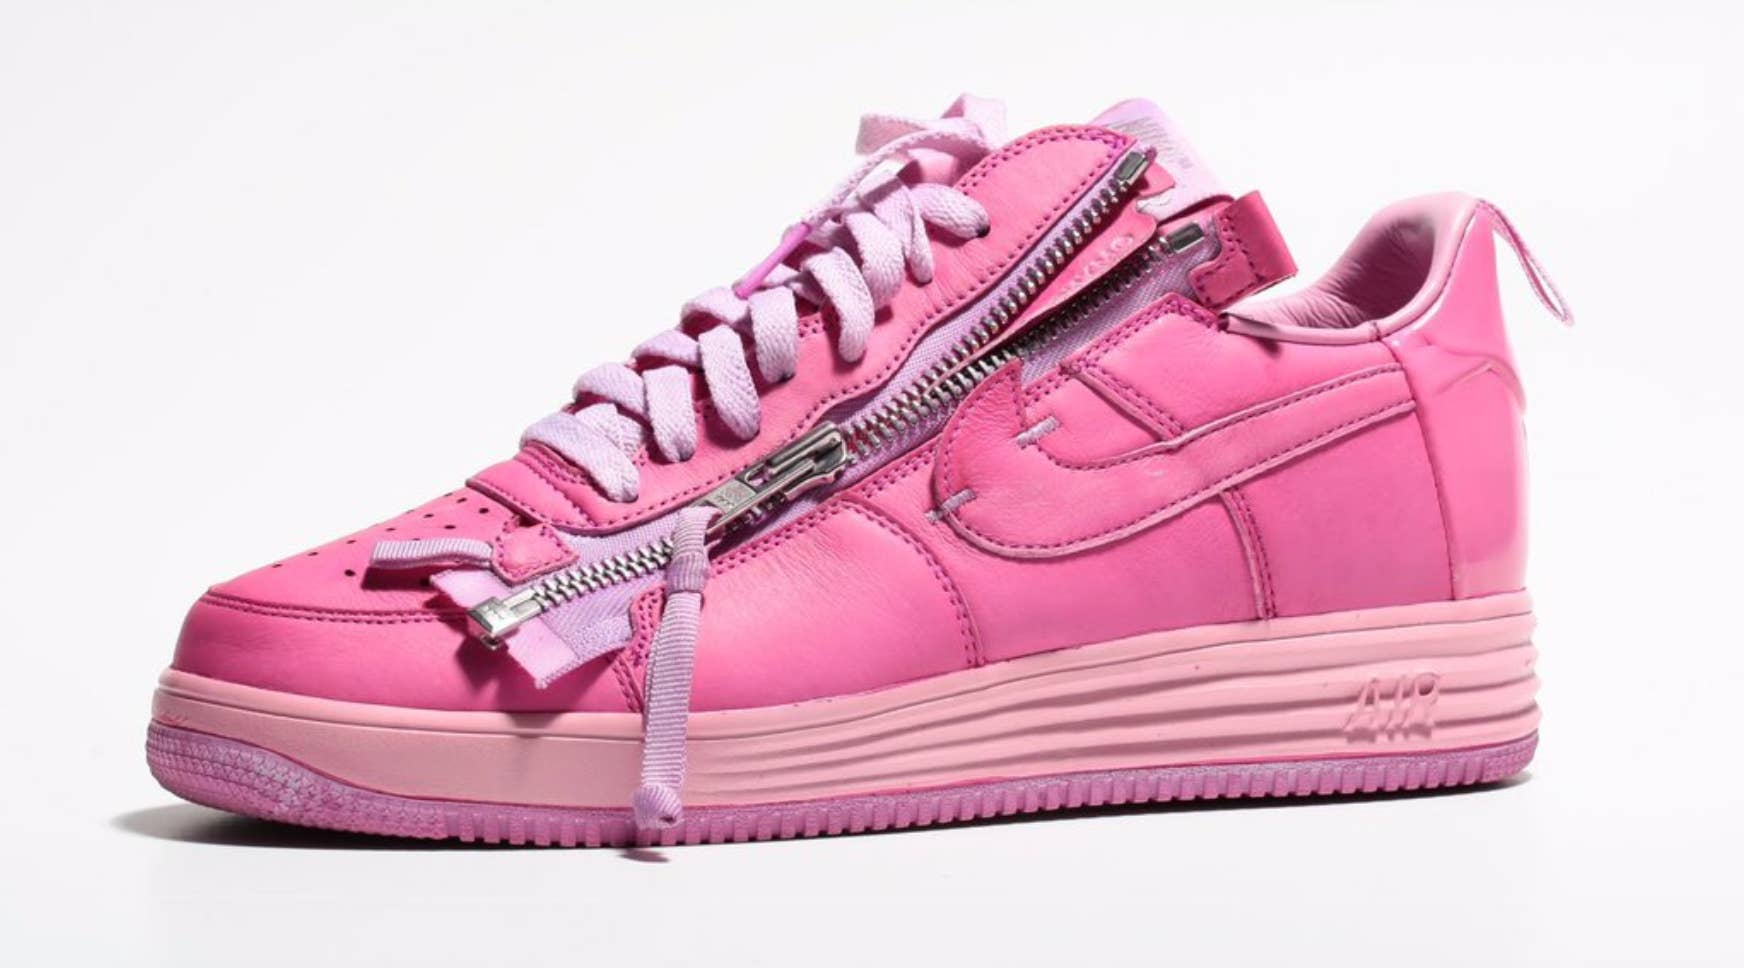 Bodega Released a Limited Run of the Pink Dip-Dyed Acronym Lunar